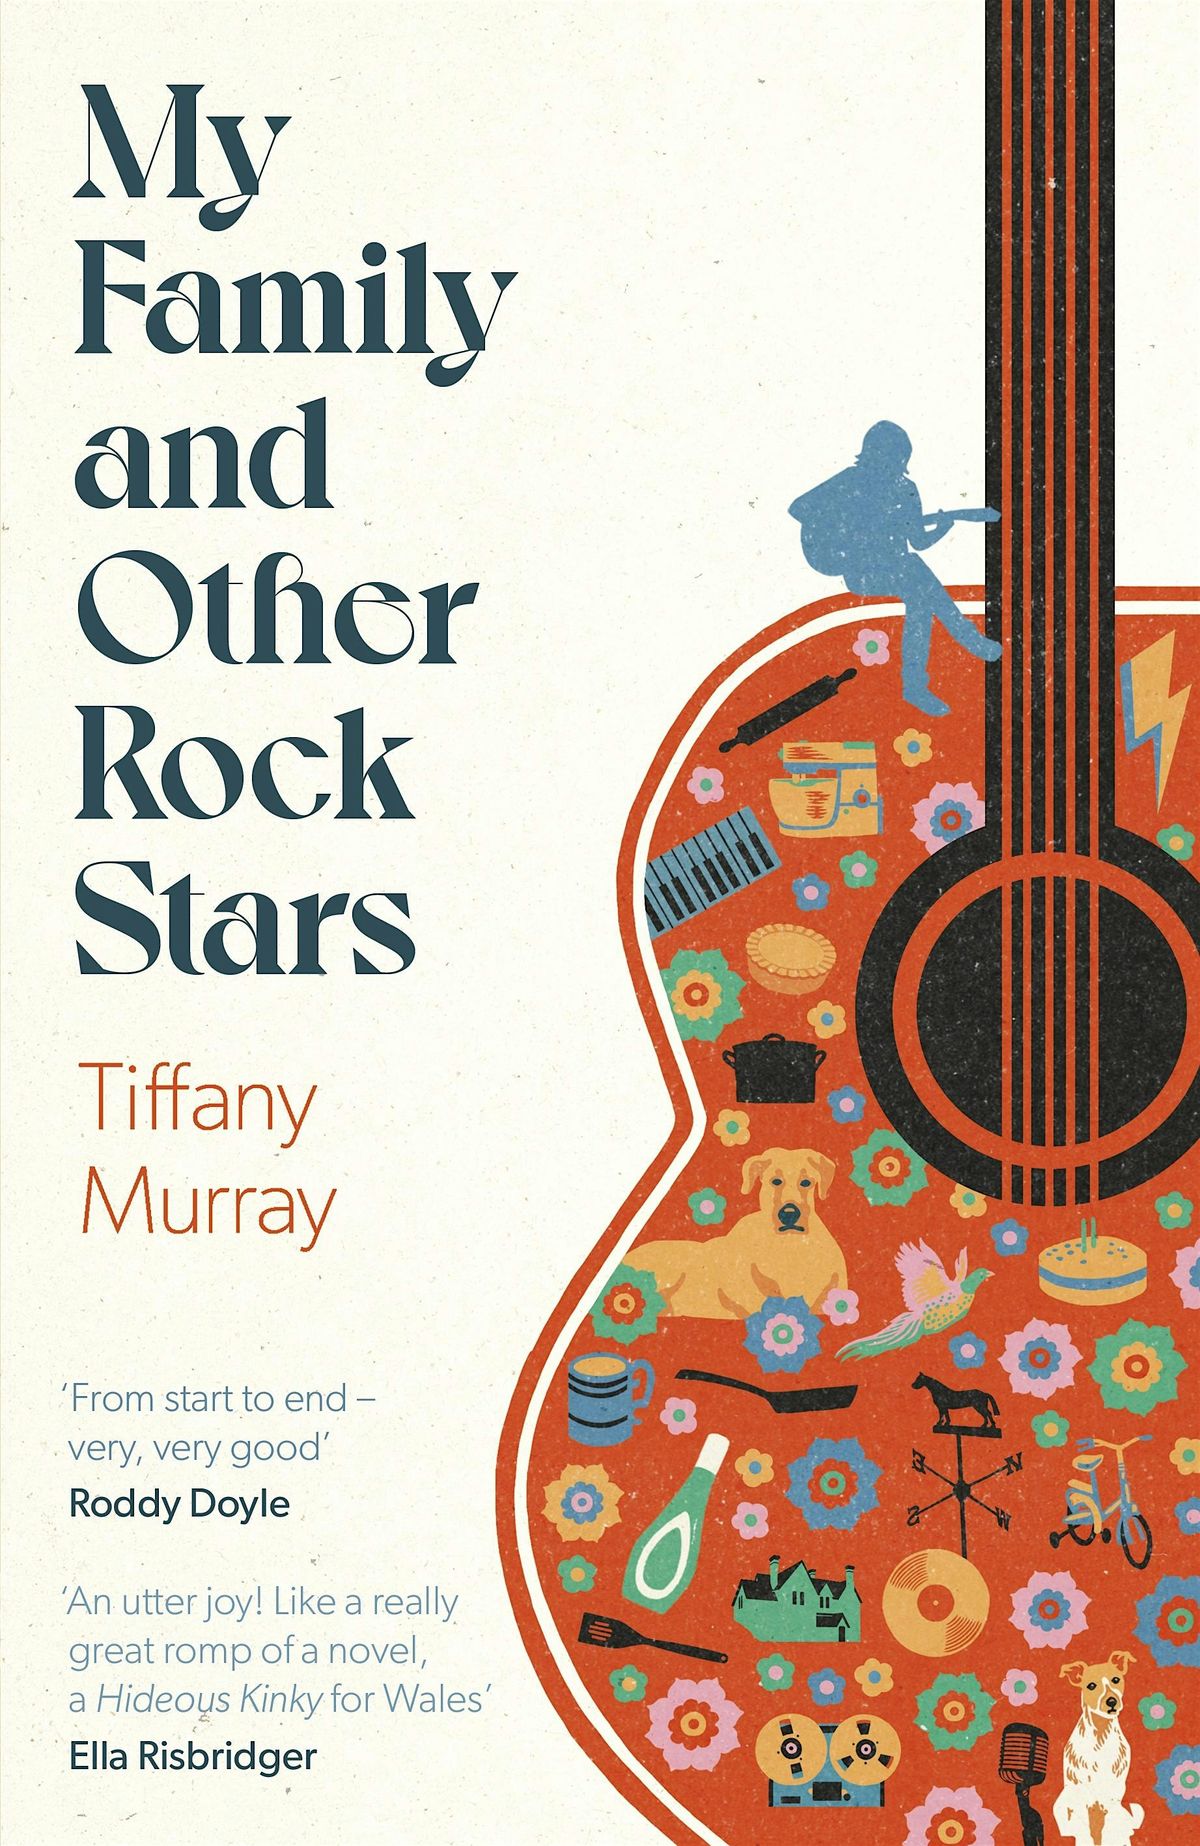 My Family and Other Rock Stars - Tiffany Murray & Zo\u00eb Howe in conversation